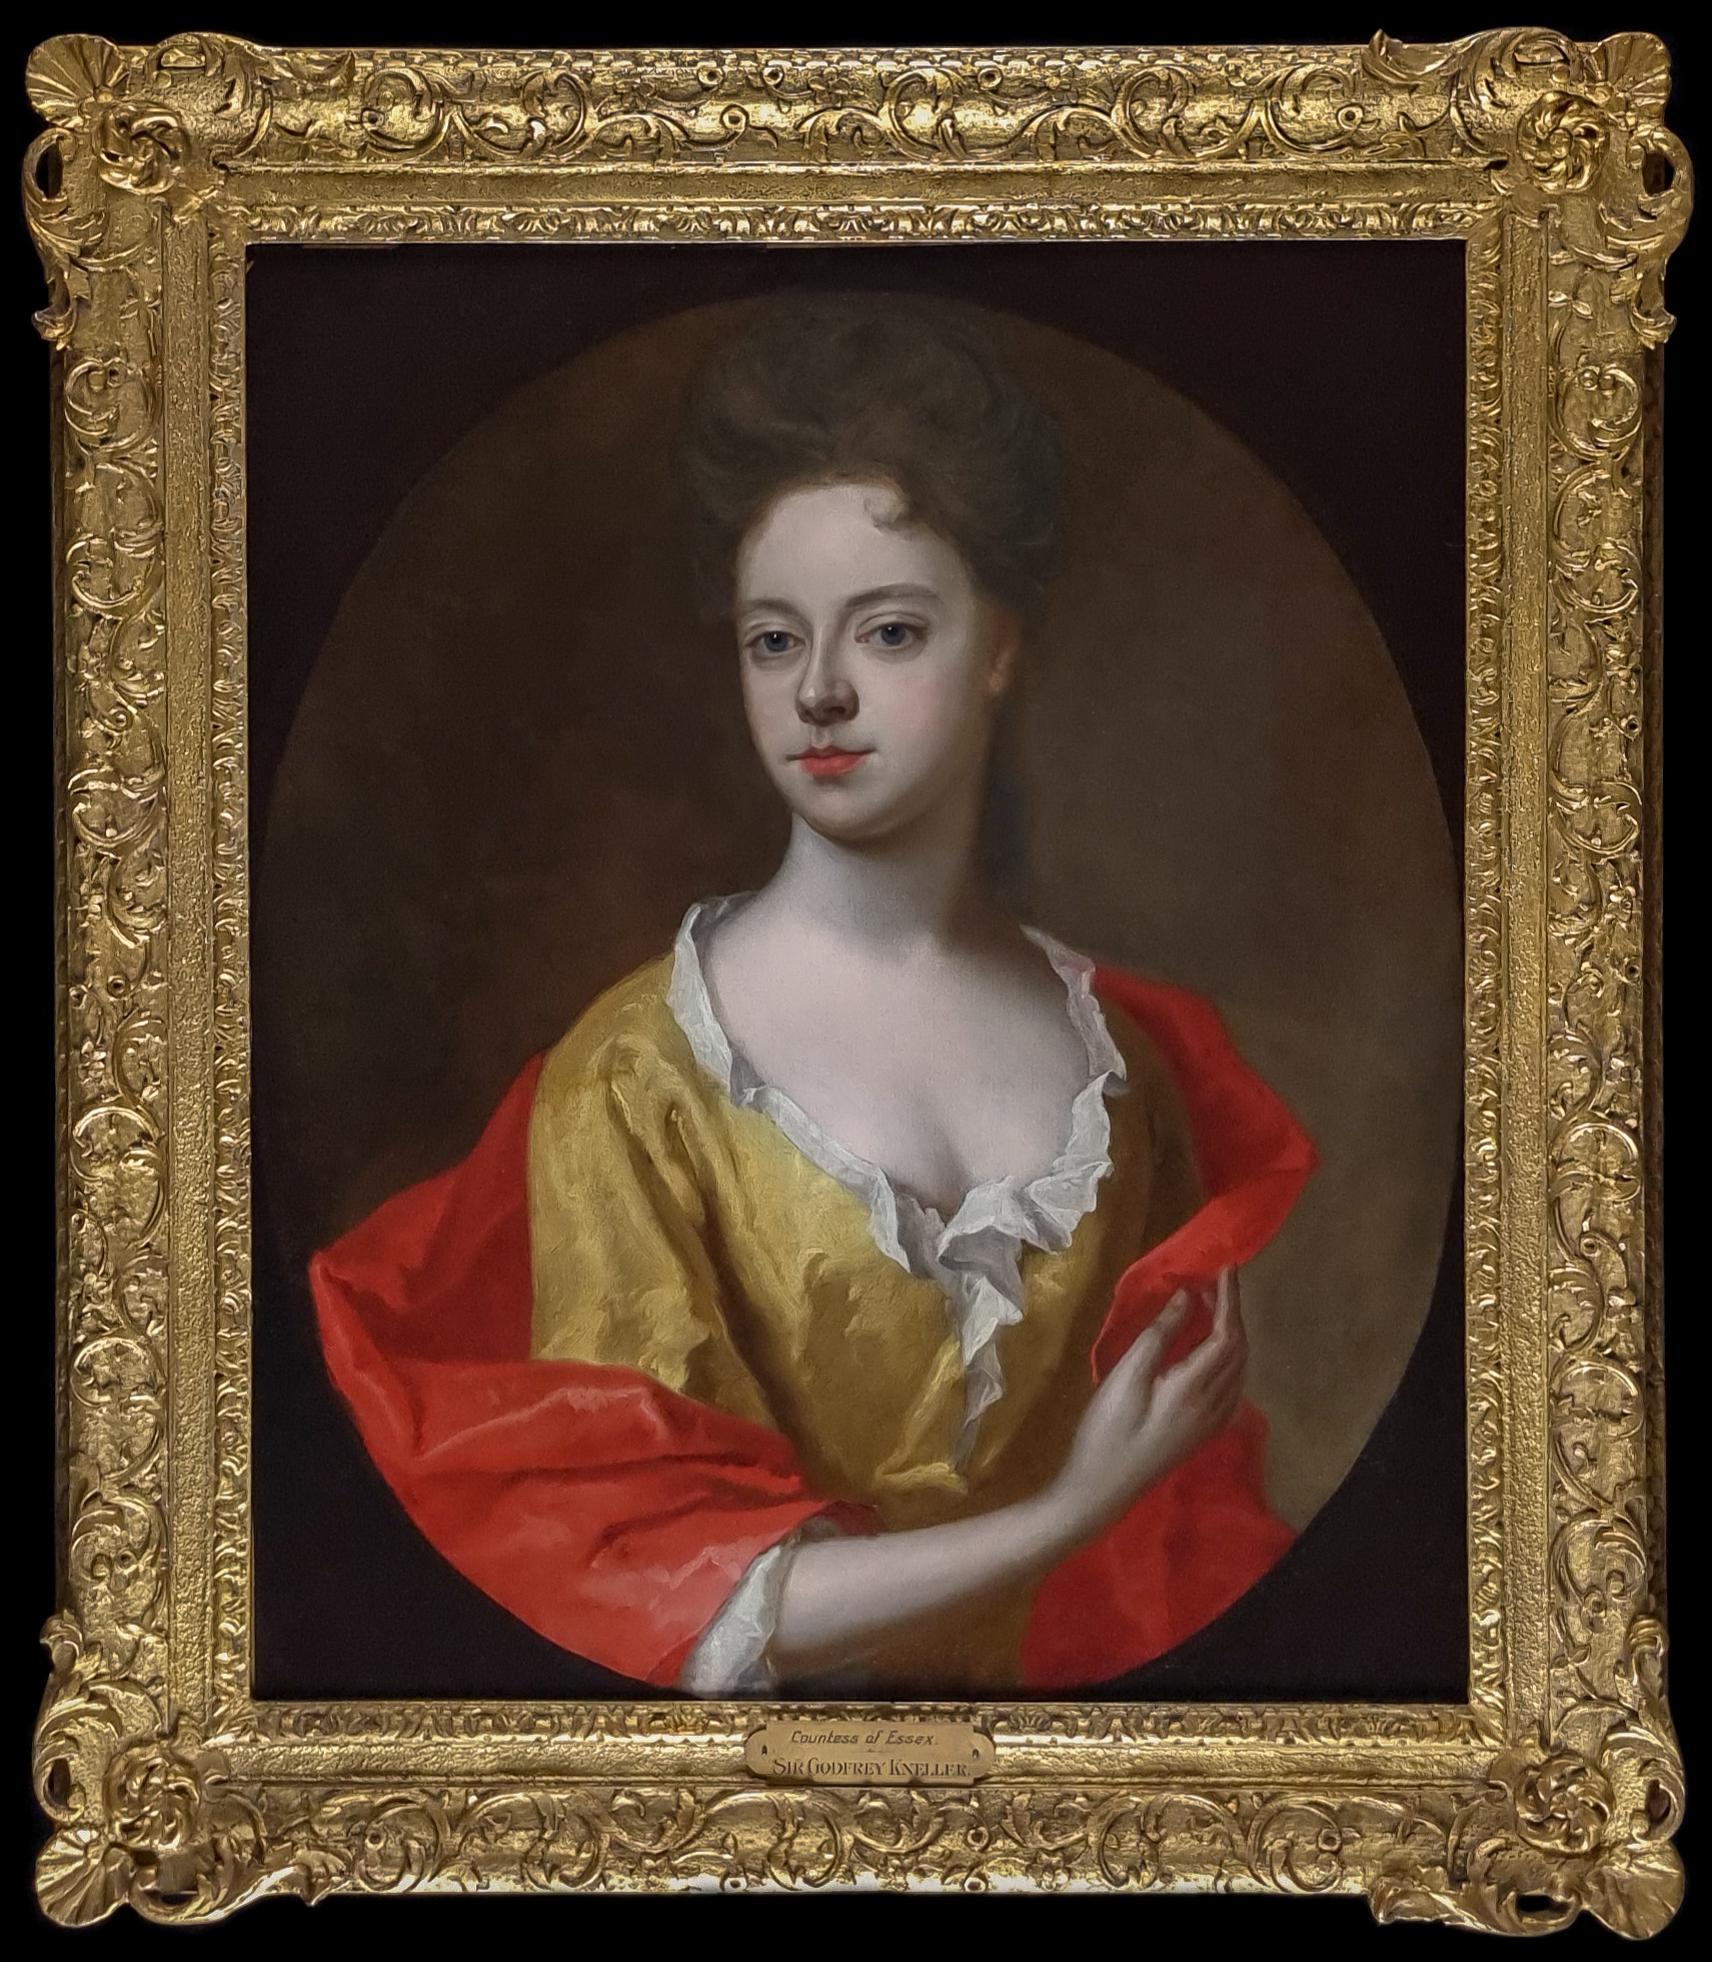 Portrait Painting of Lady Mary Capel, Countess of Essex in a Yellow Dress c.1698